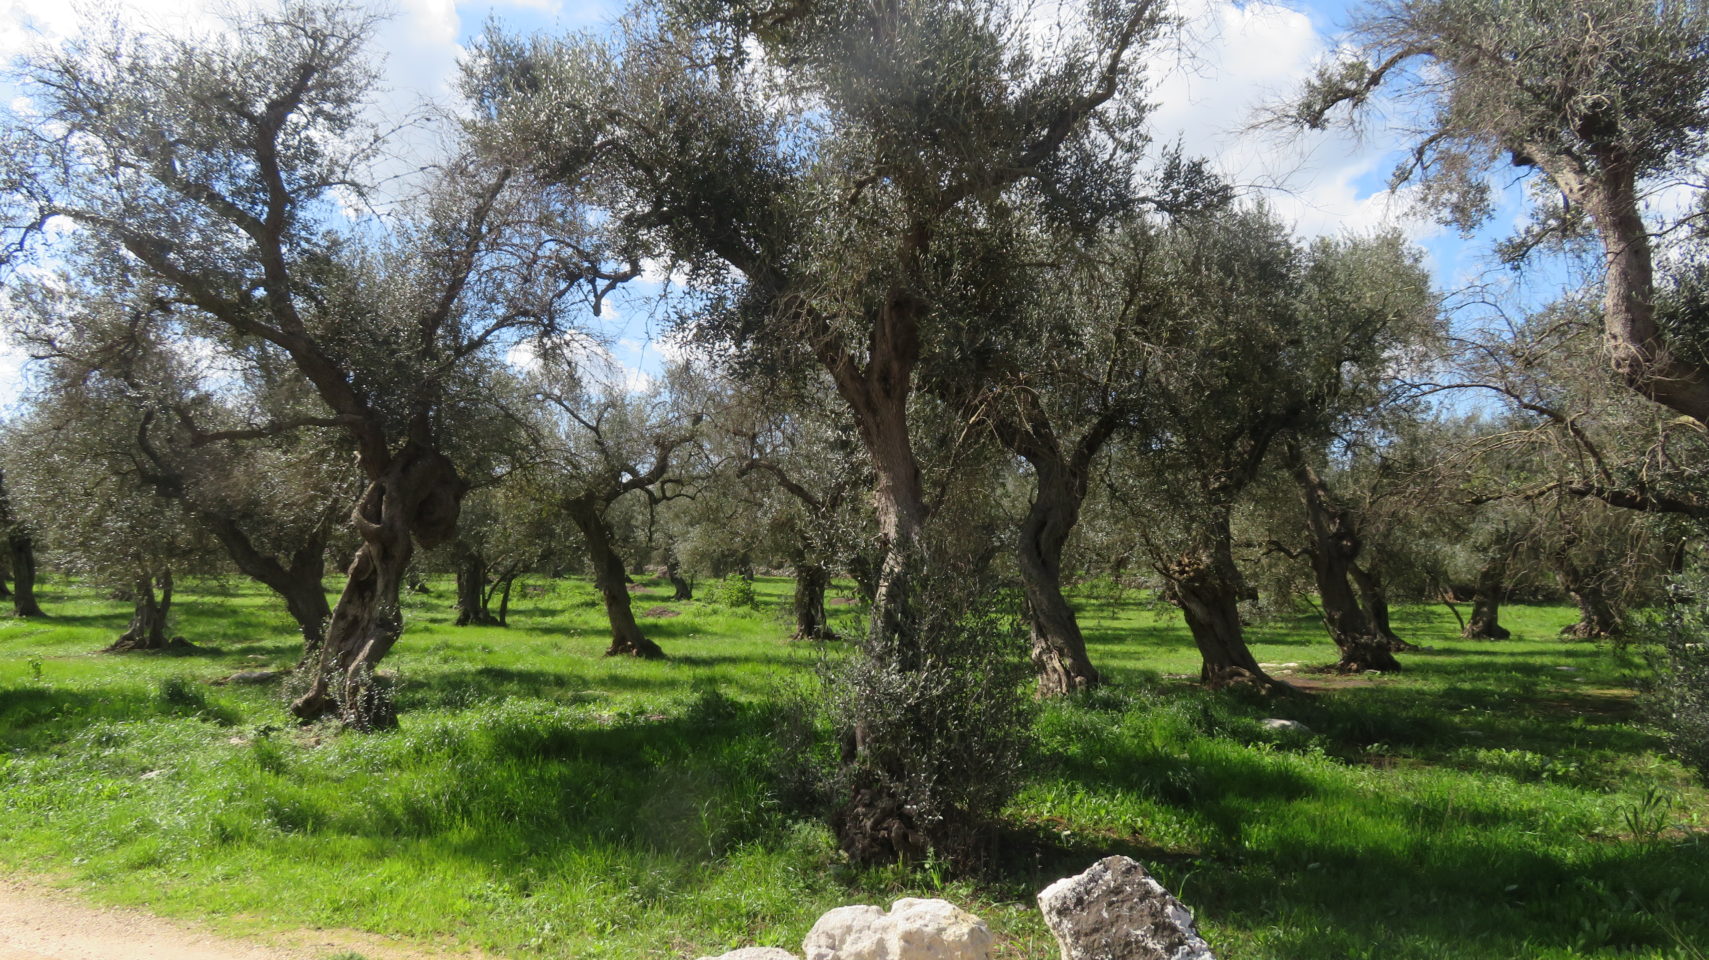 Olive tree groves on each side of the road as far as the eye can see ~ The Wholesome Charms of Salento